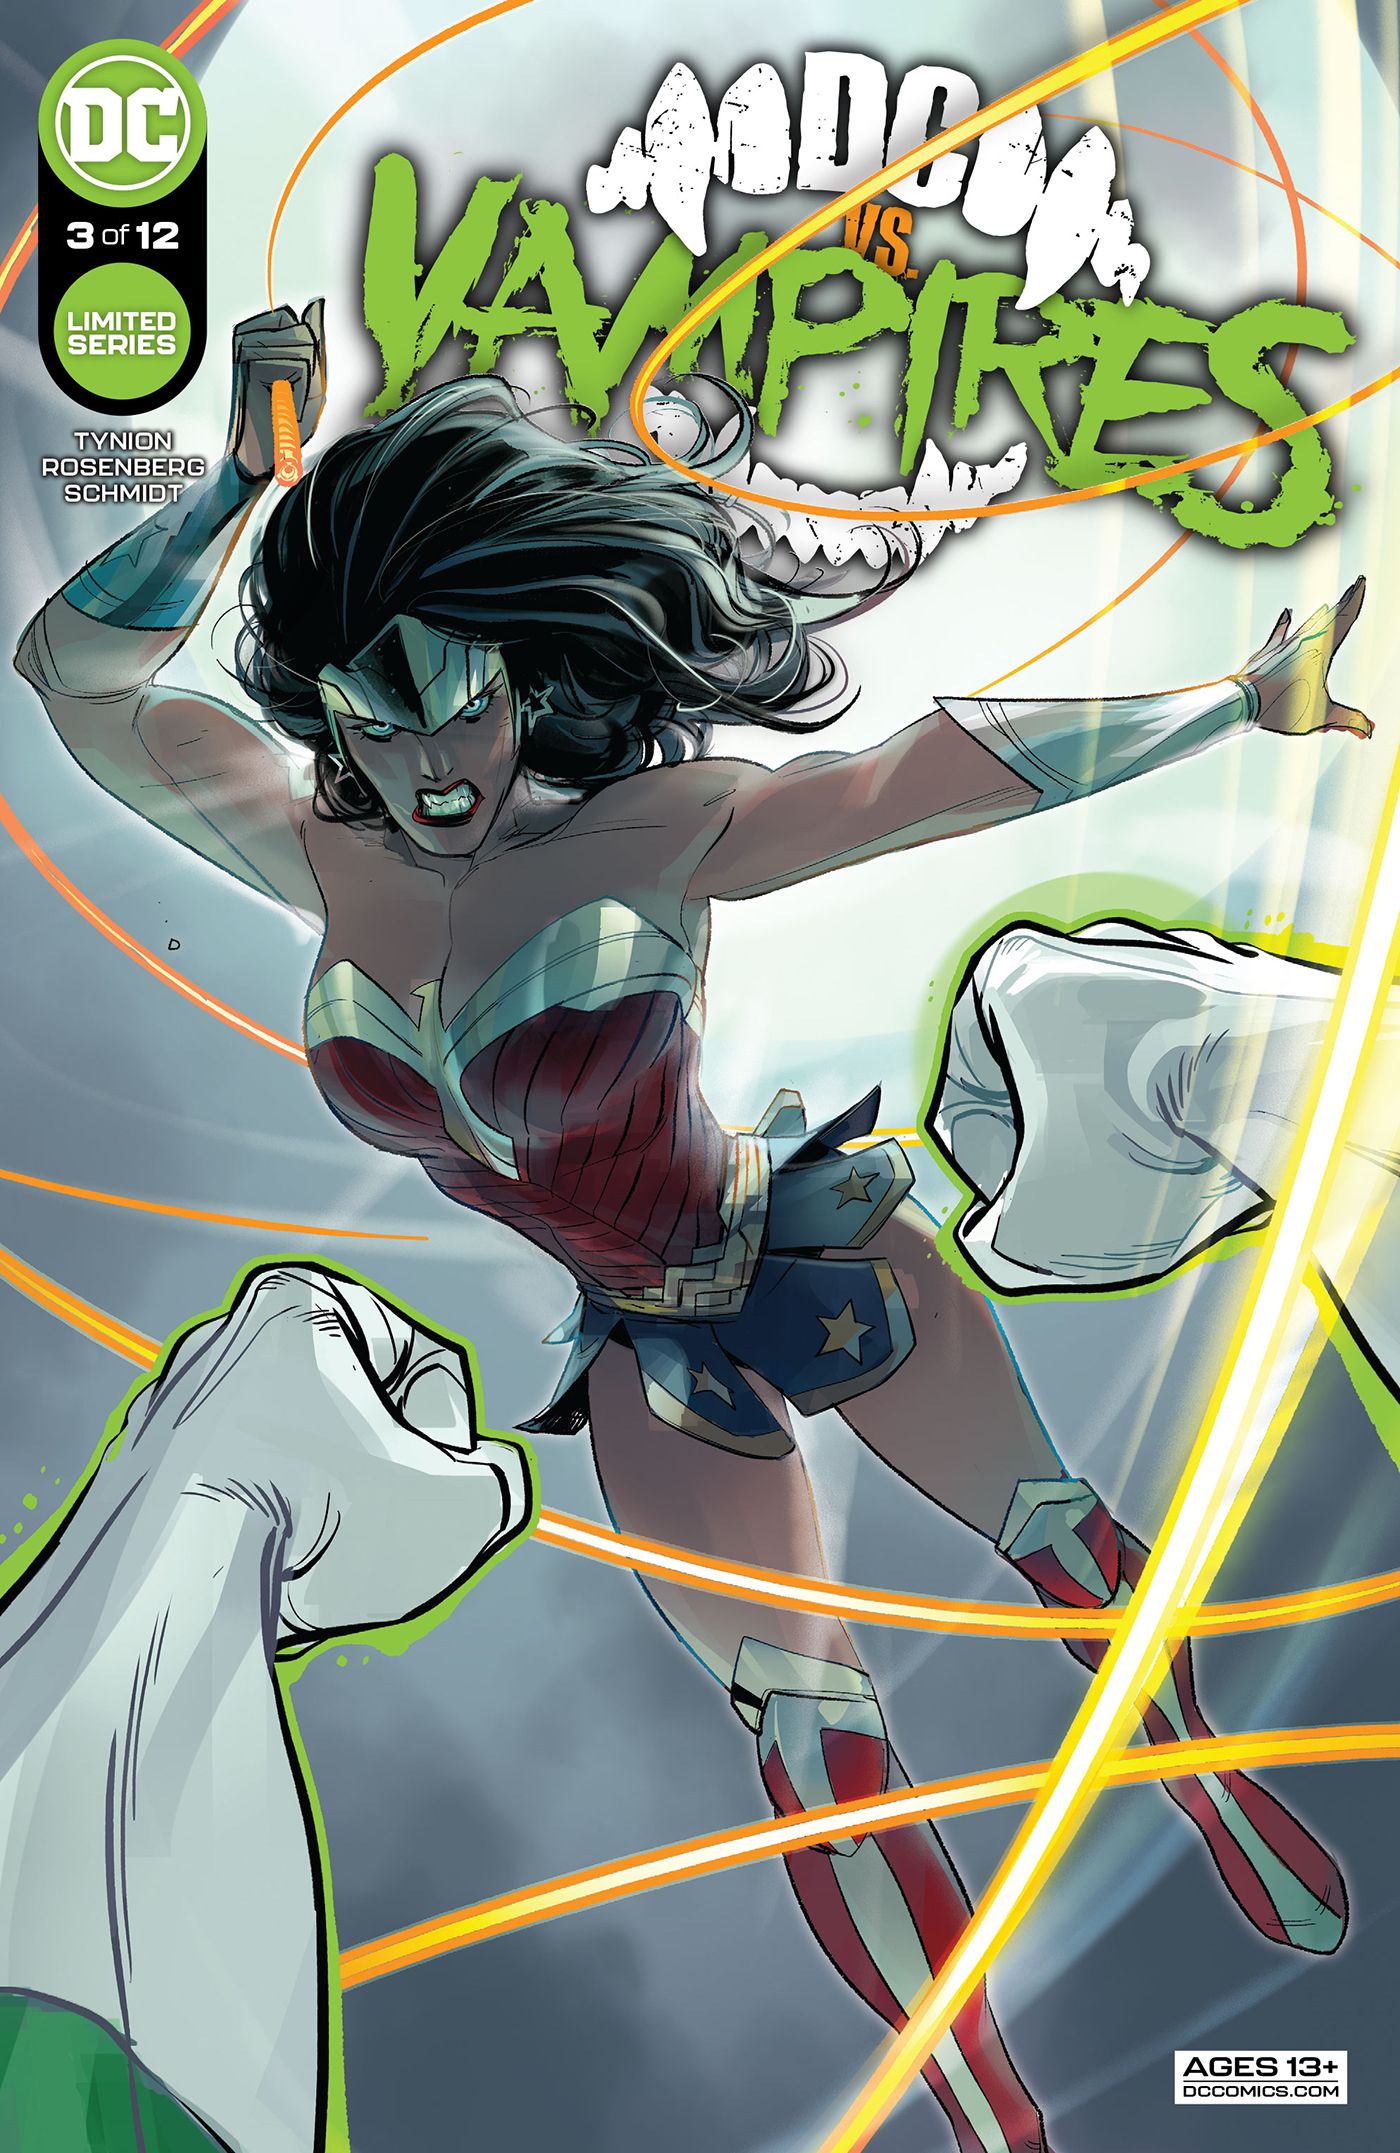 Wonder Woman fights Green Lantern on the cover for DC vs. Vampires #3.